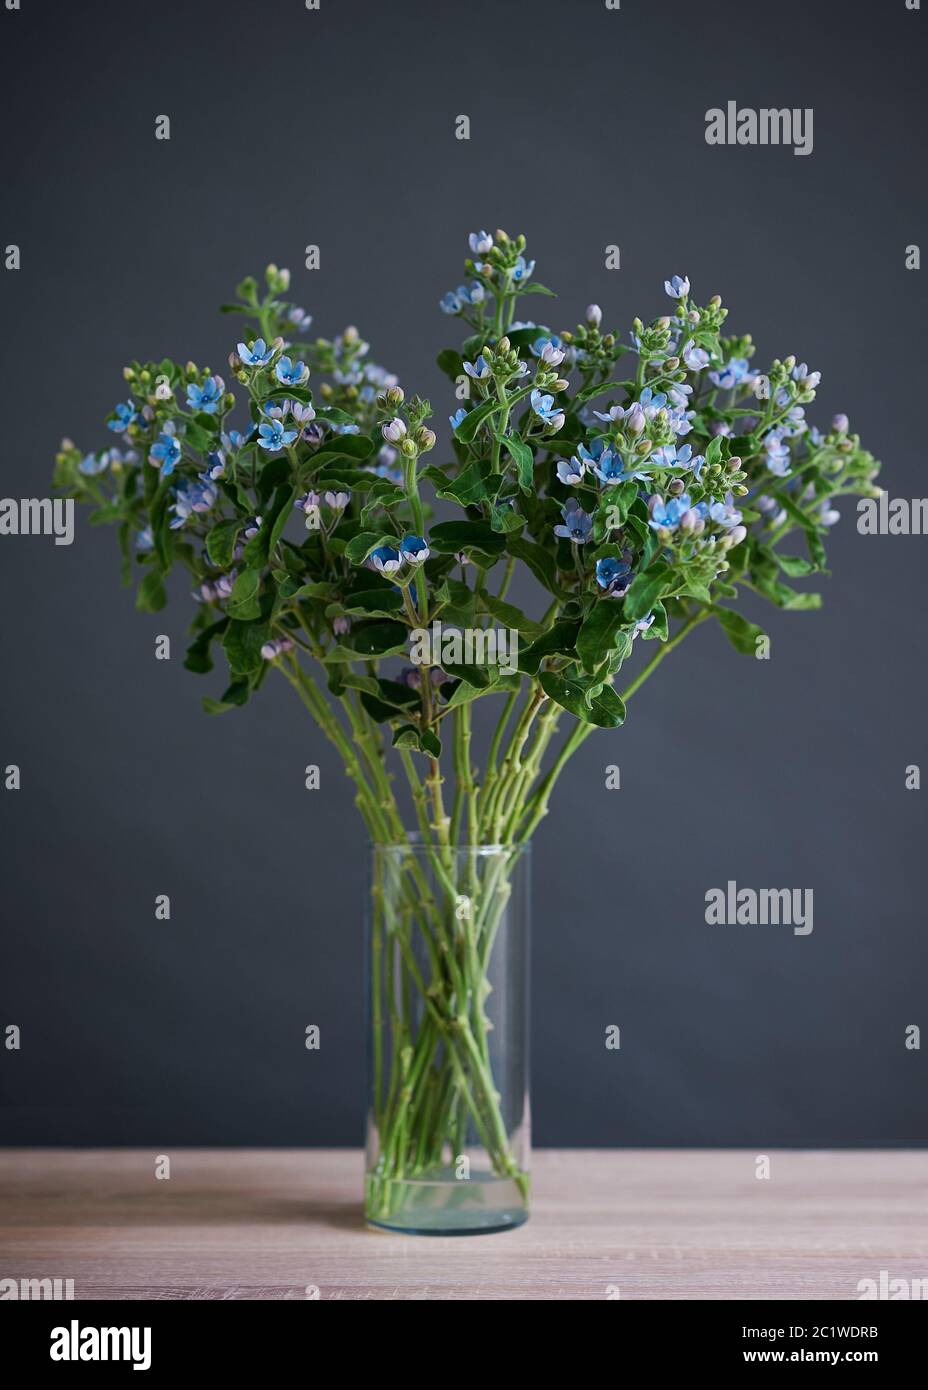 Beautiful bouquet of blue flowers in a transparent glass vase. Stock Photo